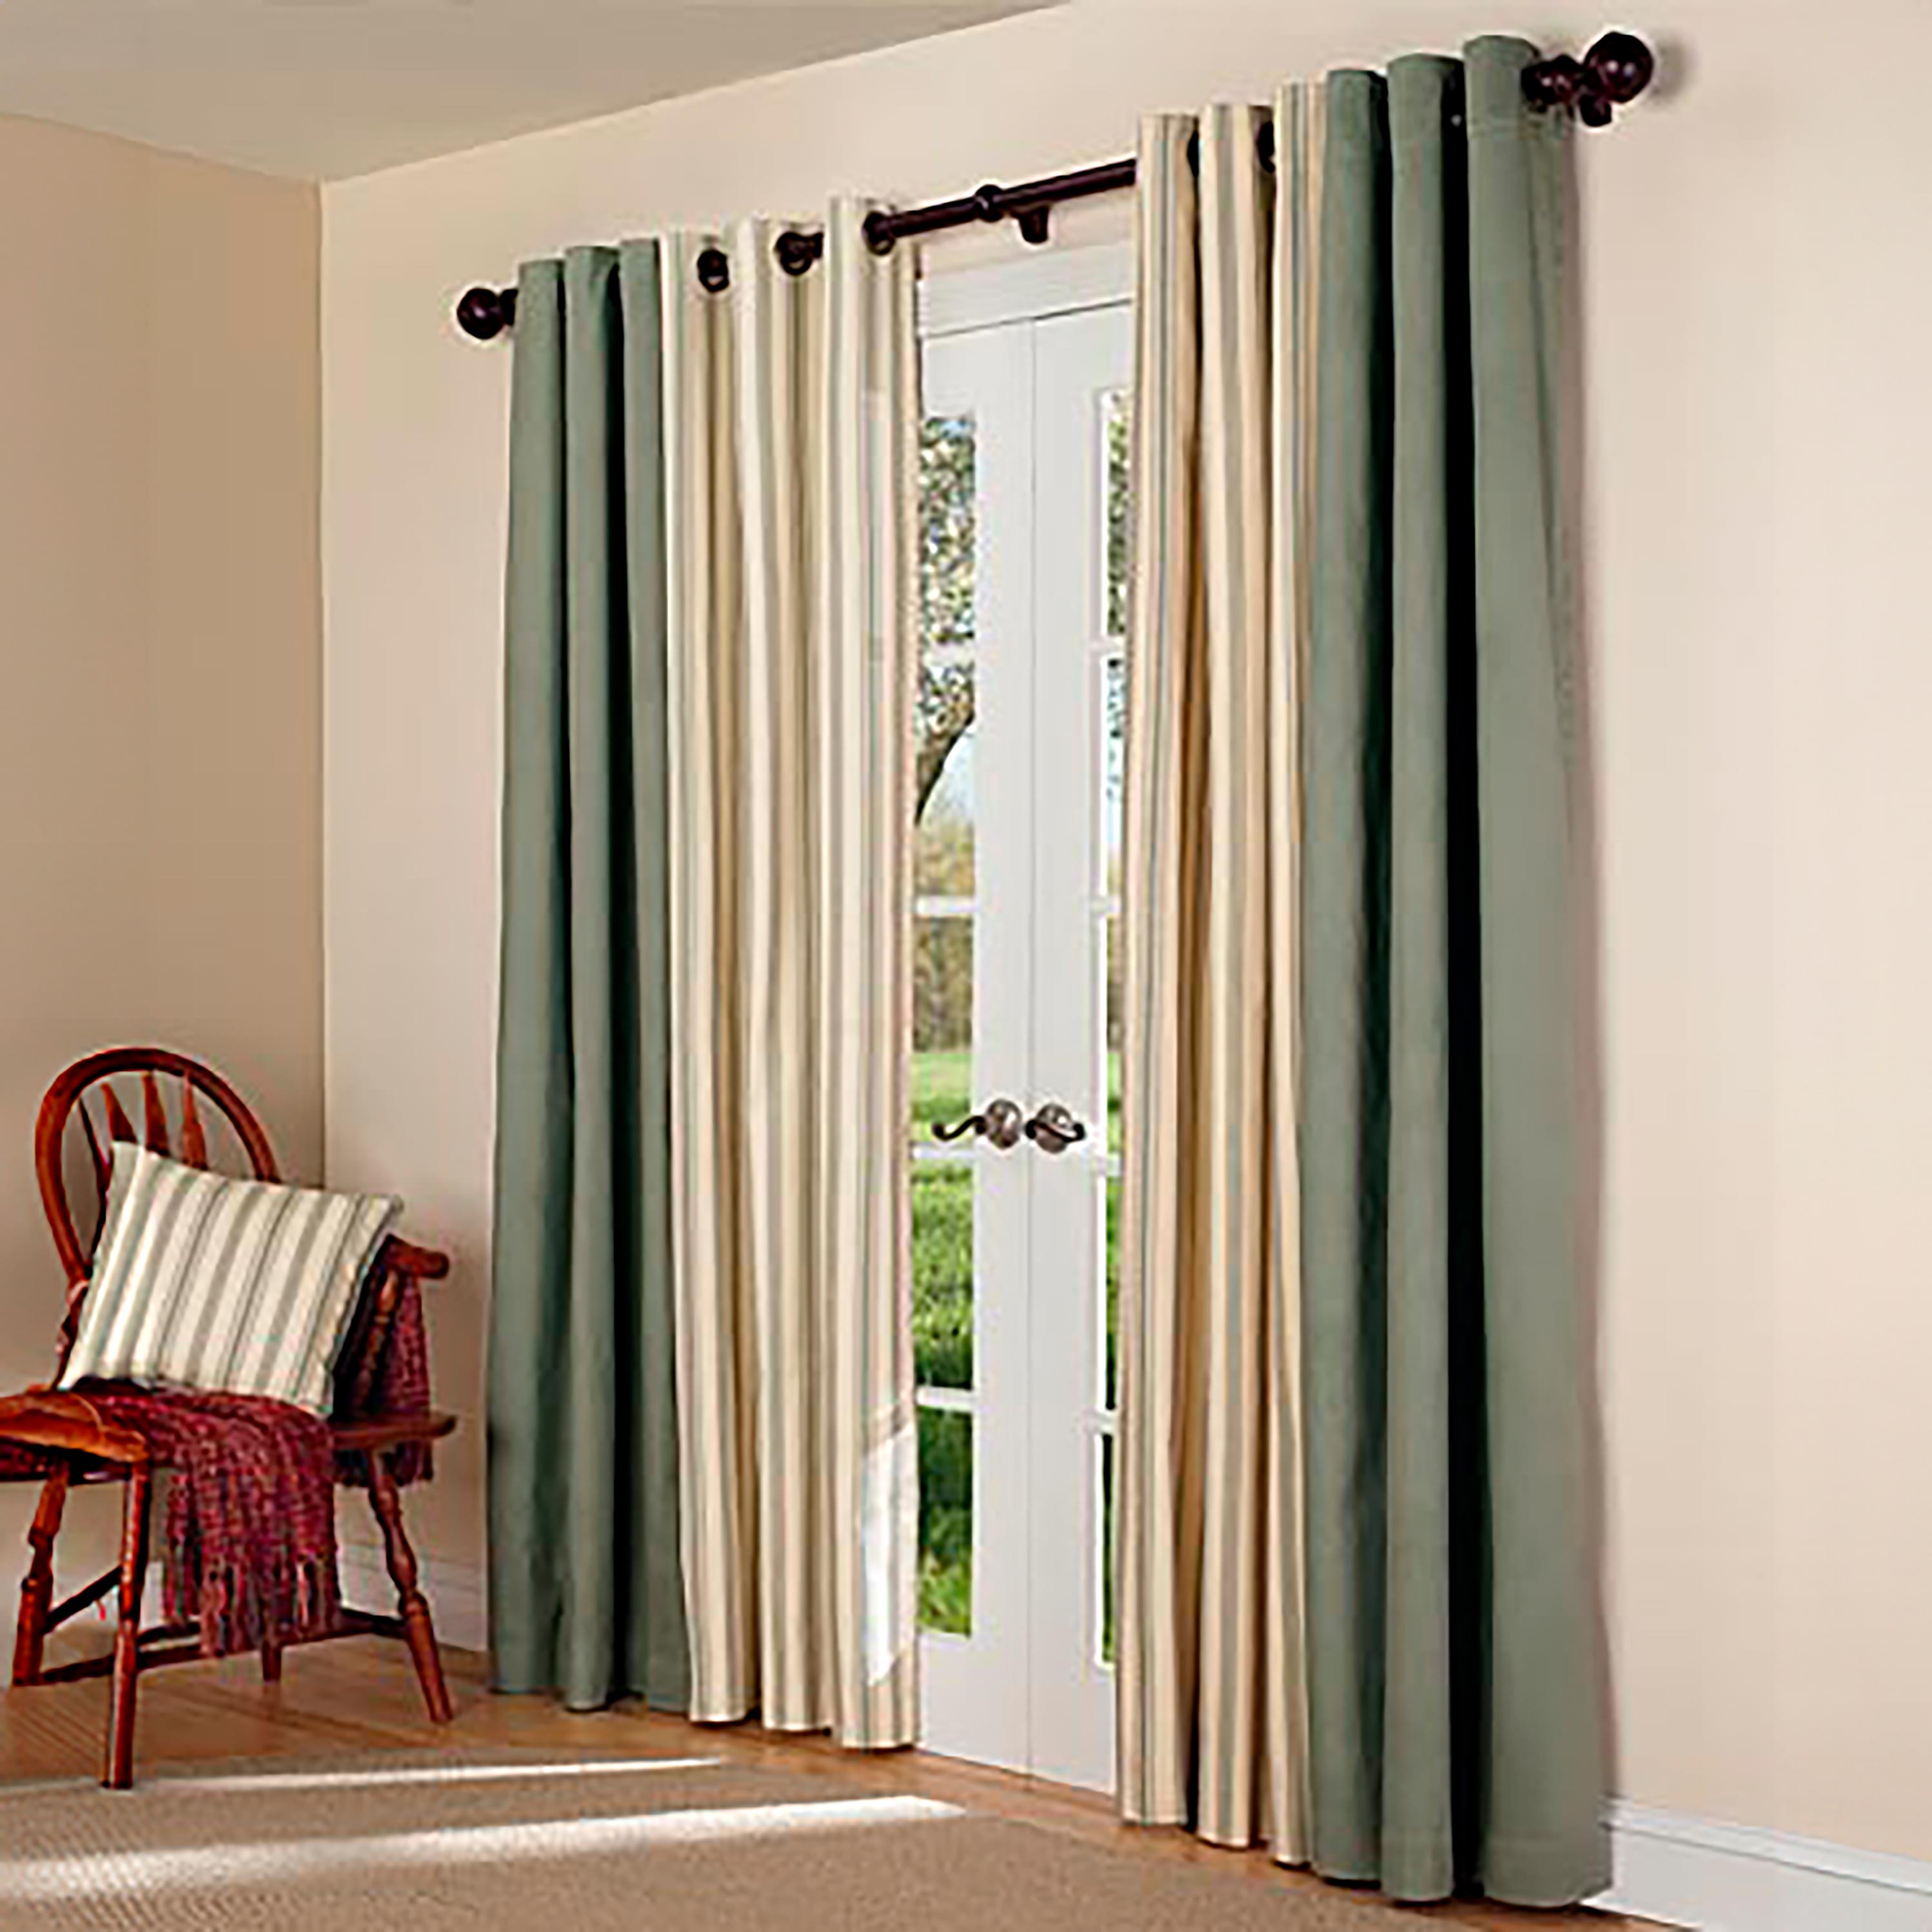 Thermalogic Energy Efficient Insulated Solid Grommet-Top Curtains